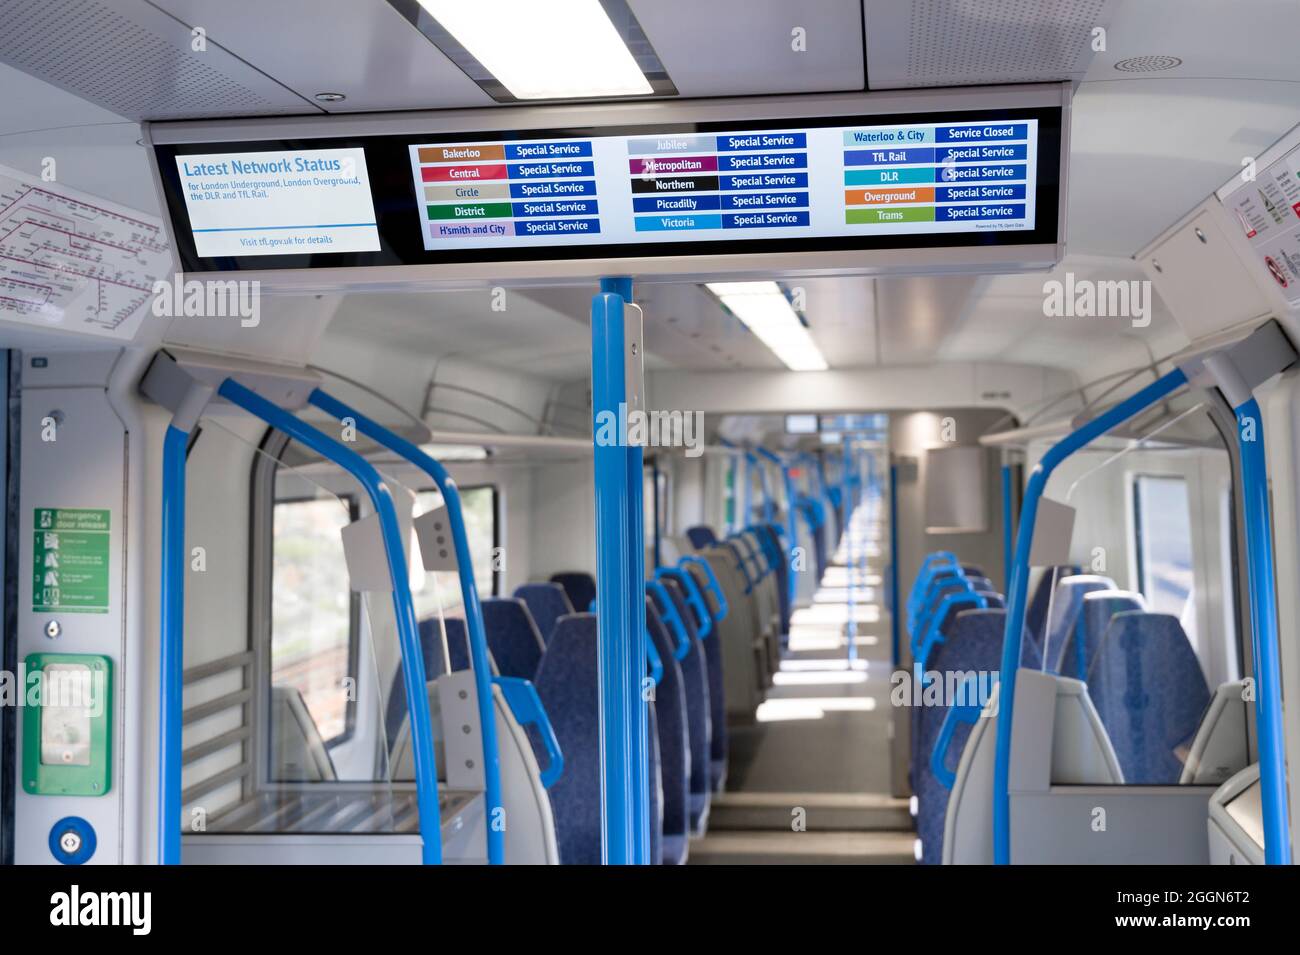 On-board passenger information screen on a class 700 passenger train in the UK. Stock Photo